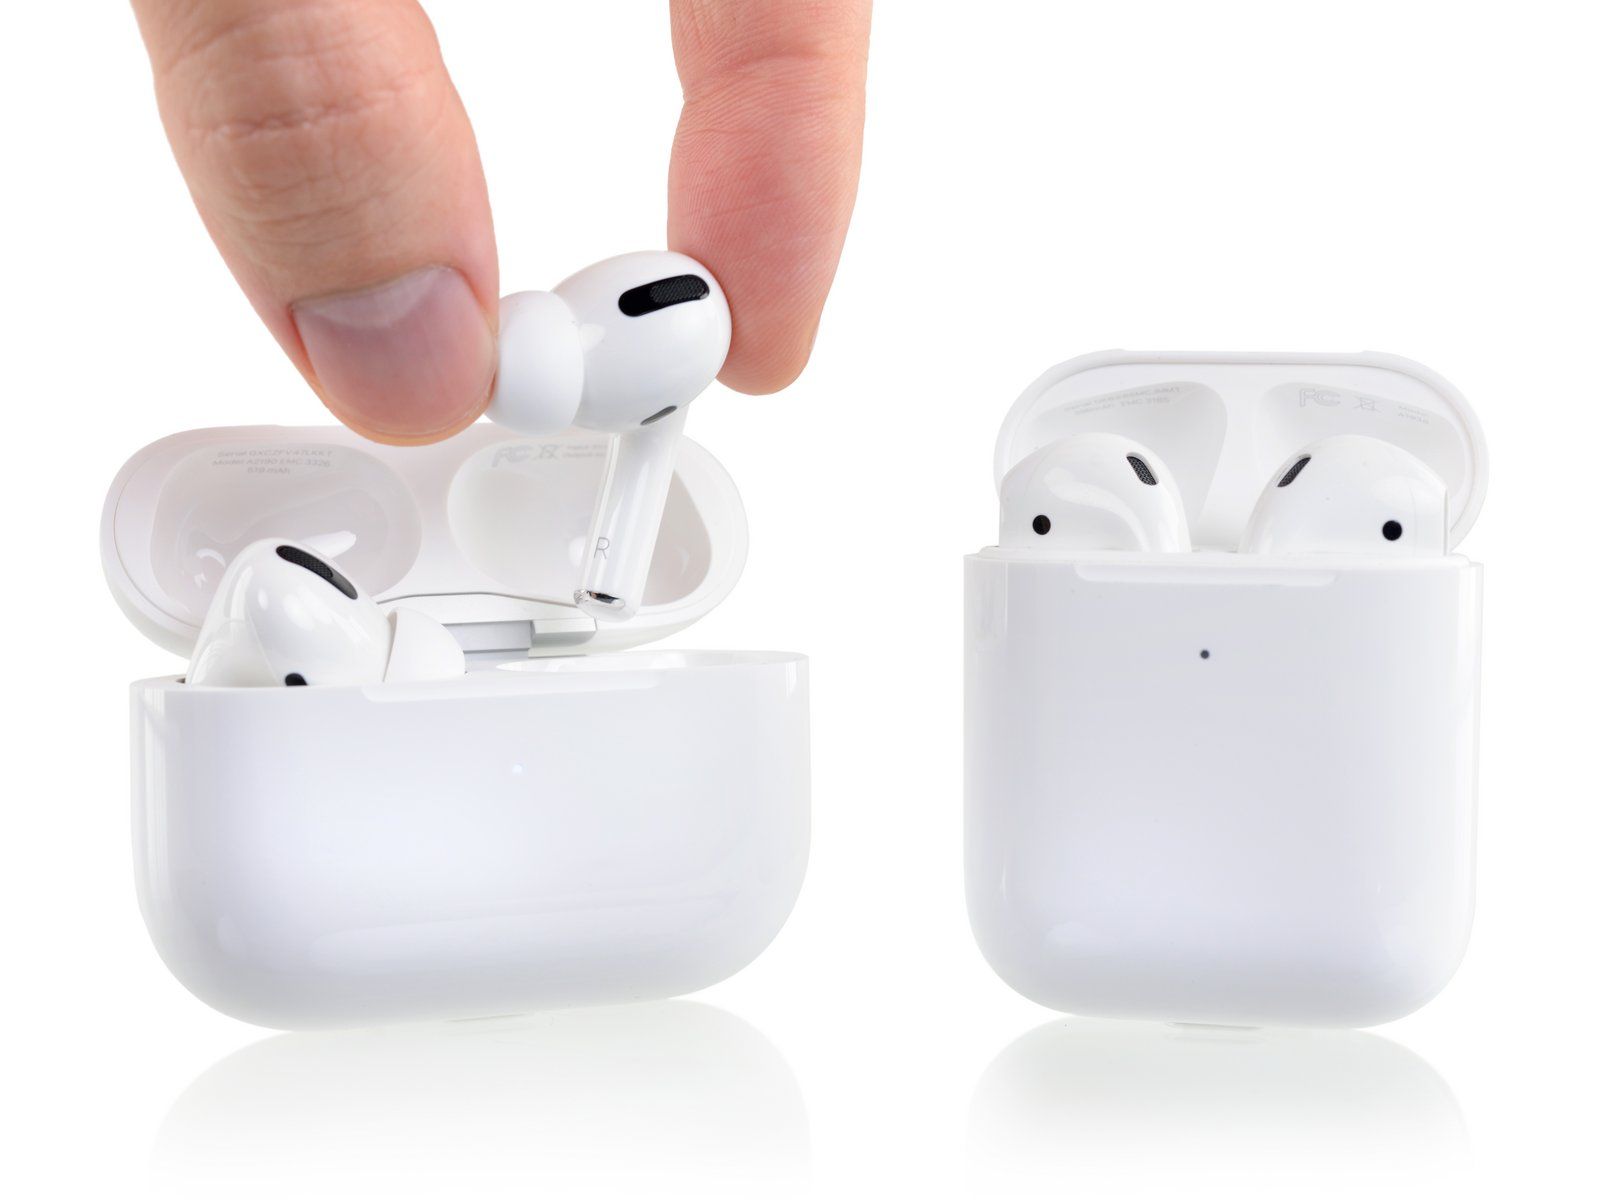 AirPods sales are expected to double this year;  Pros are among the best inventions of 2019